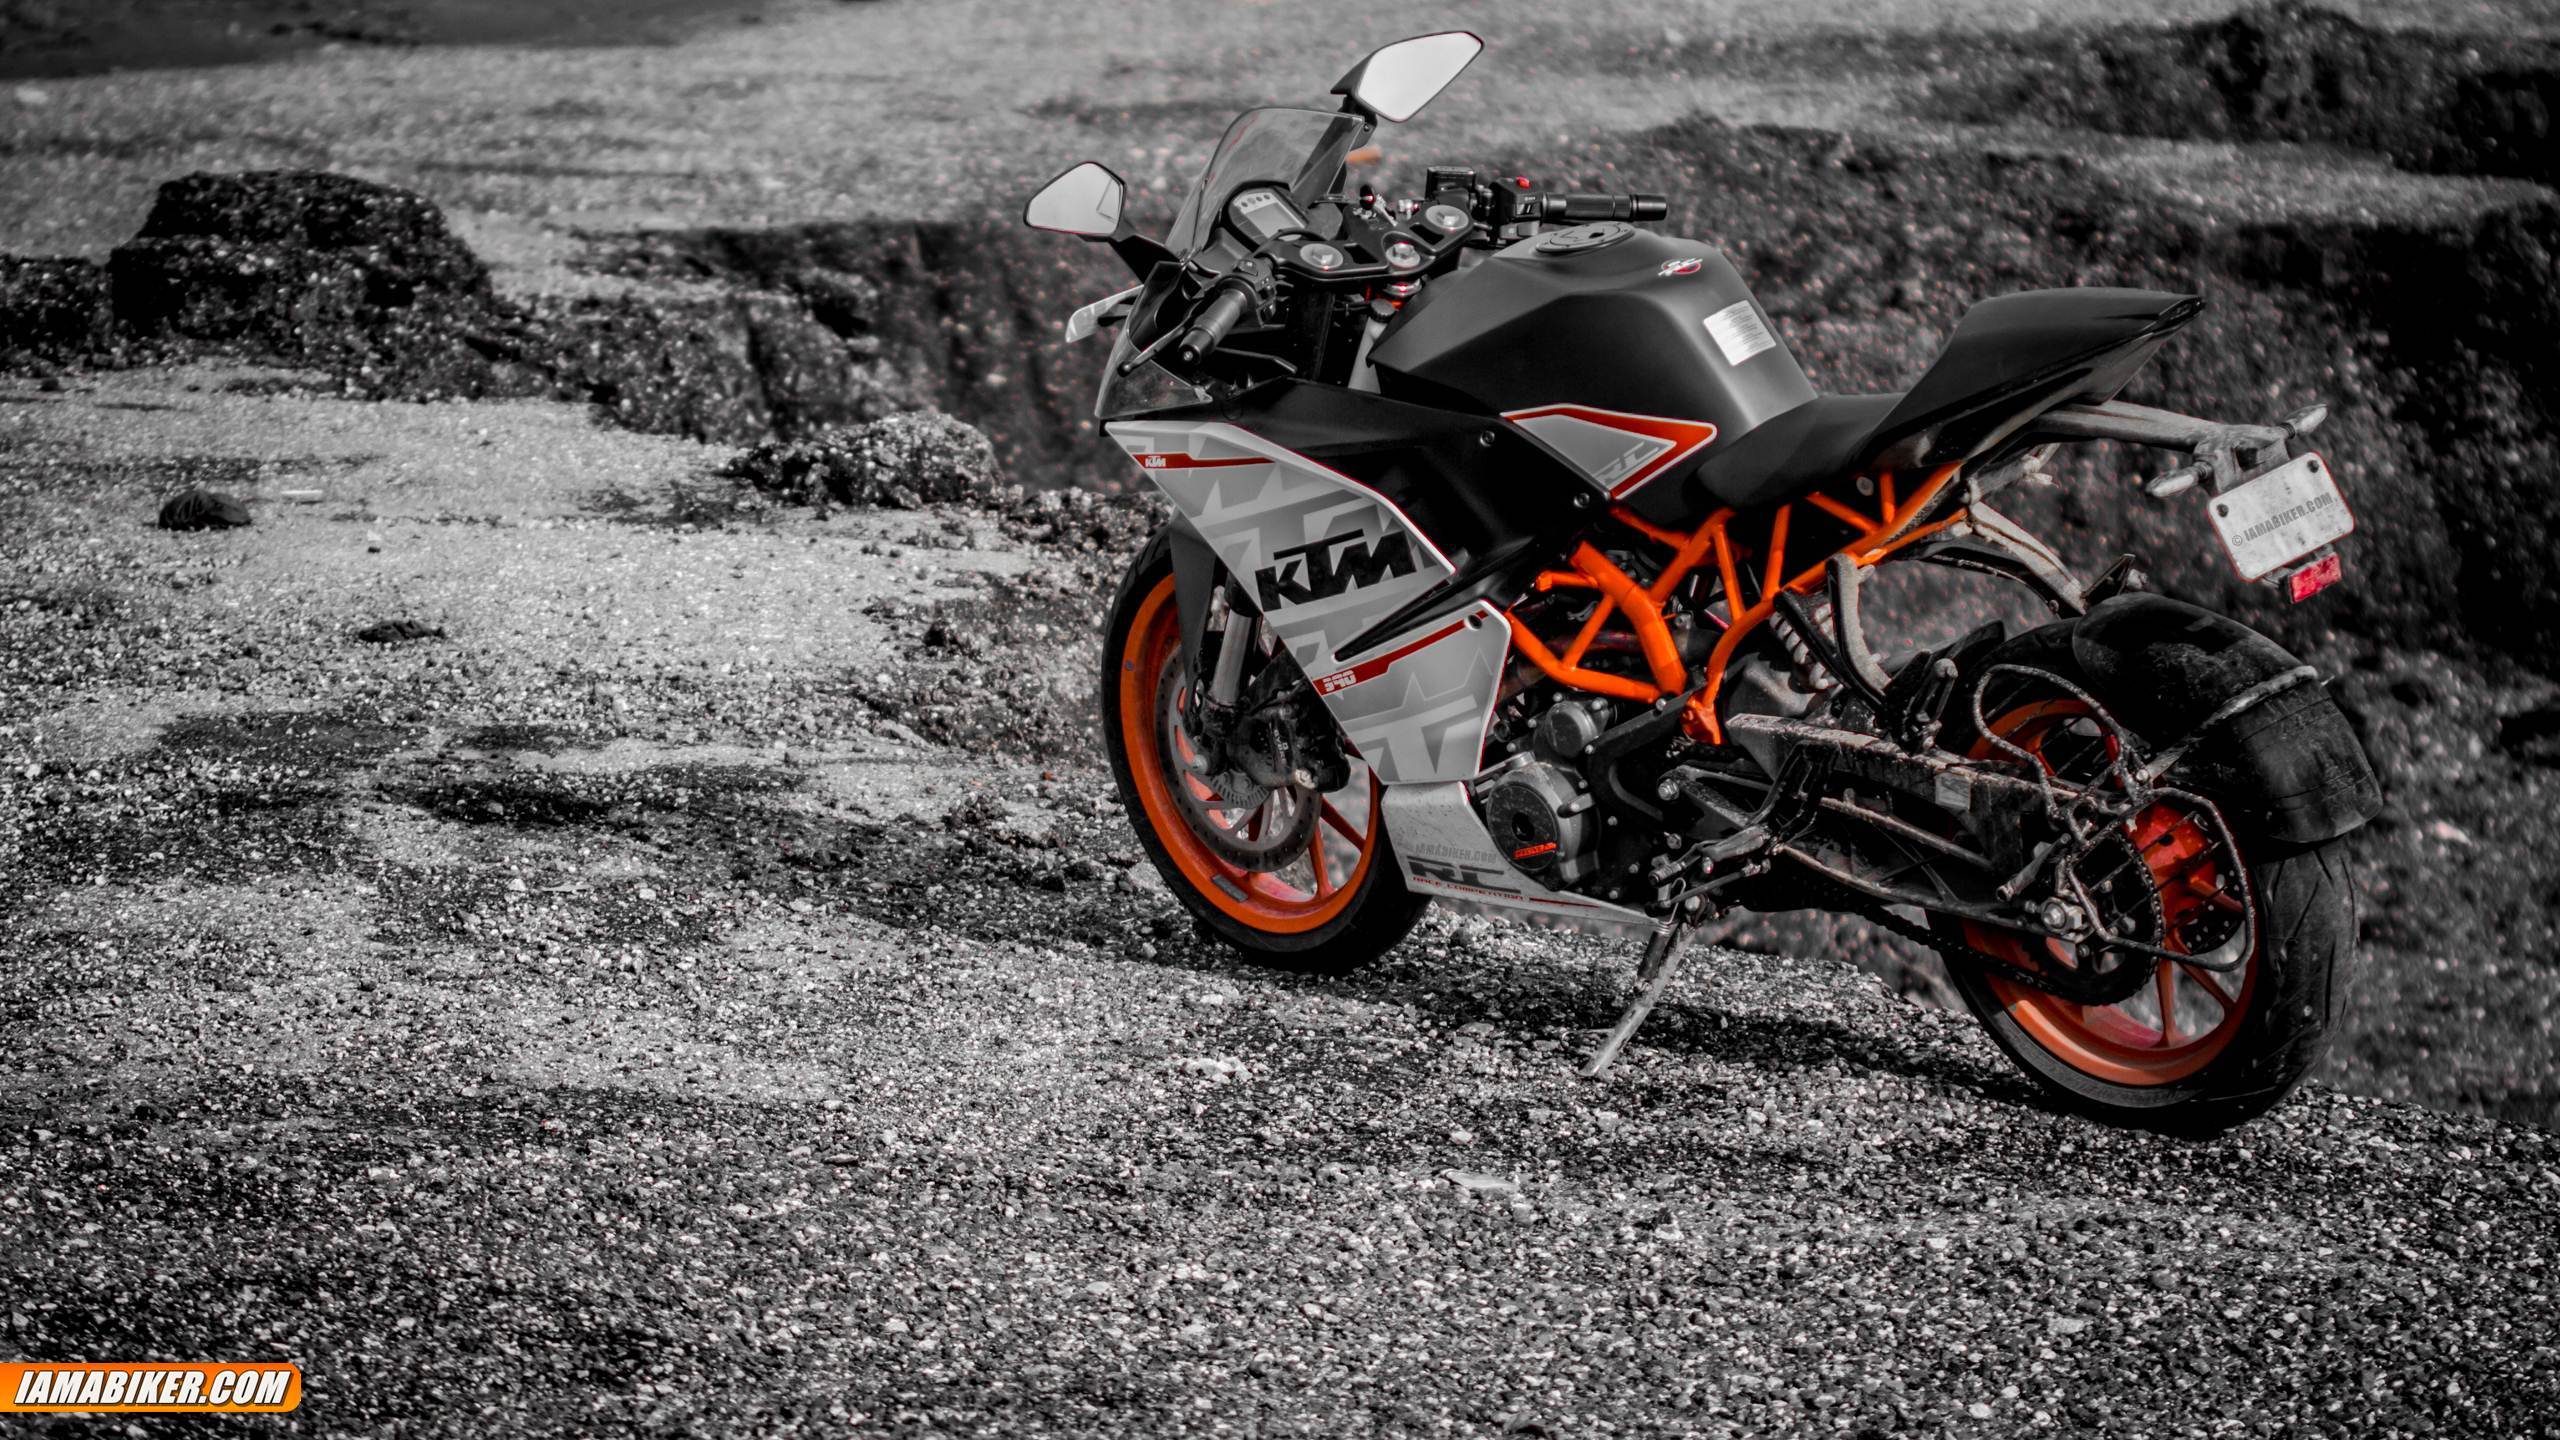 Featured image of post Ktm Duke Background For Editing - You can even use this in animations, presentation, editing, crafts, vectors, drawings, etc.